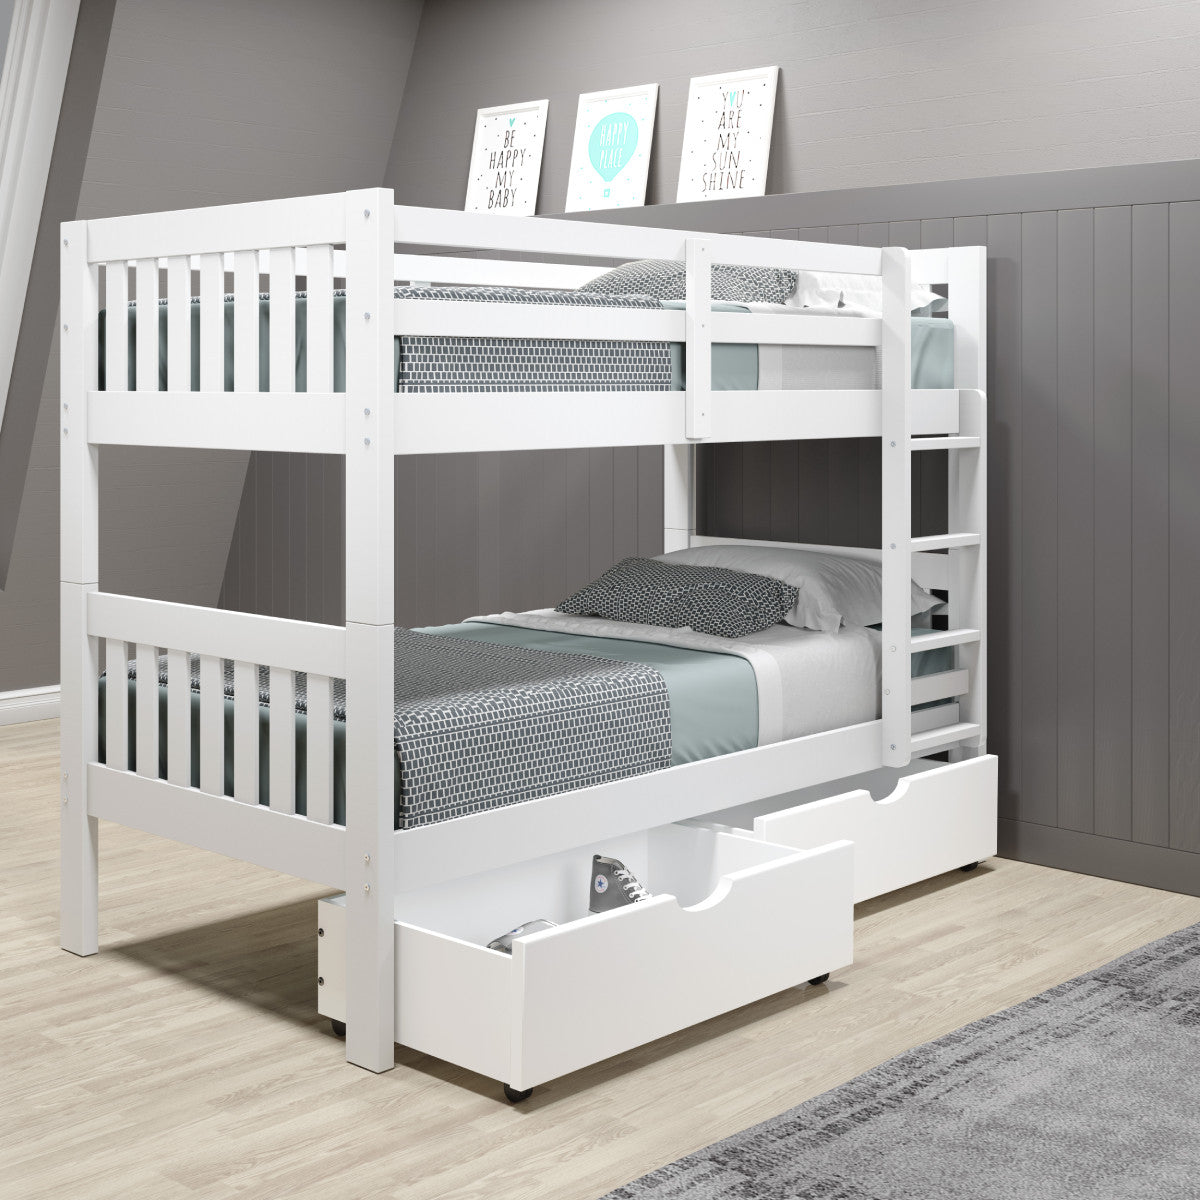 TWIN/TWIN MISSION BUNK BED W/DUAL UNDER BED DRAWERS IN WHITE FINISH